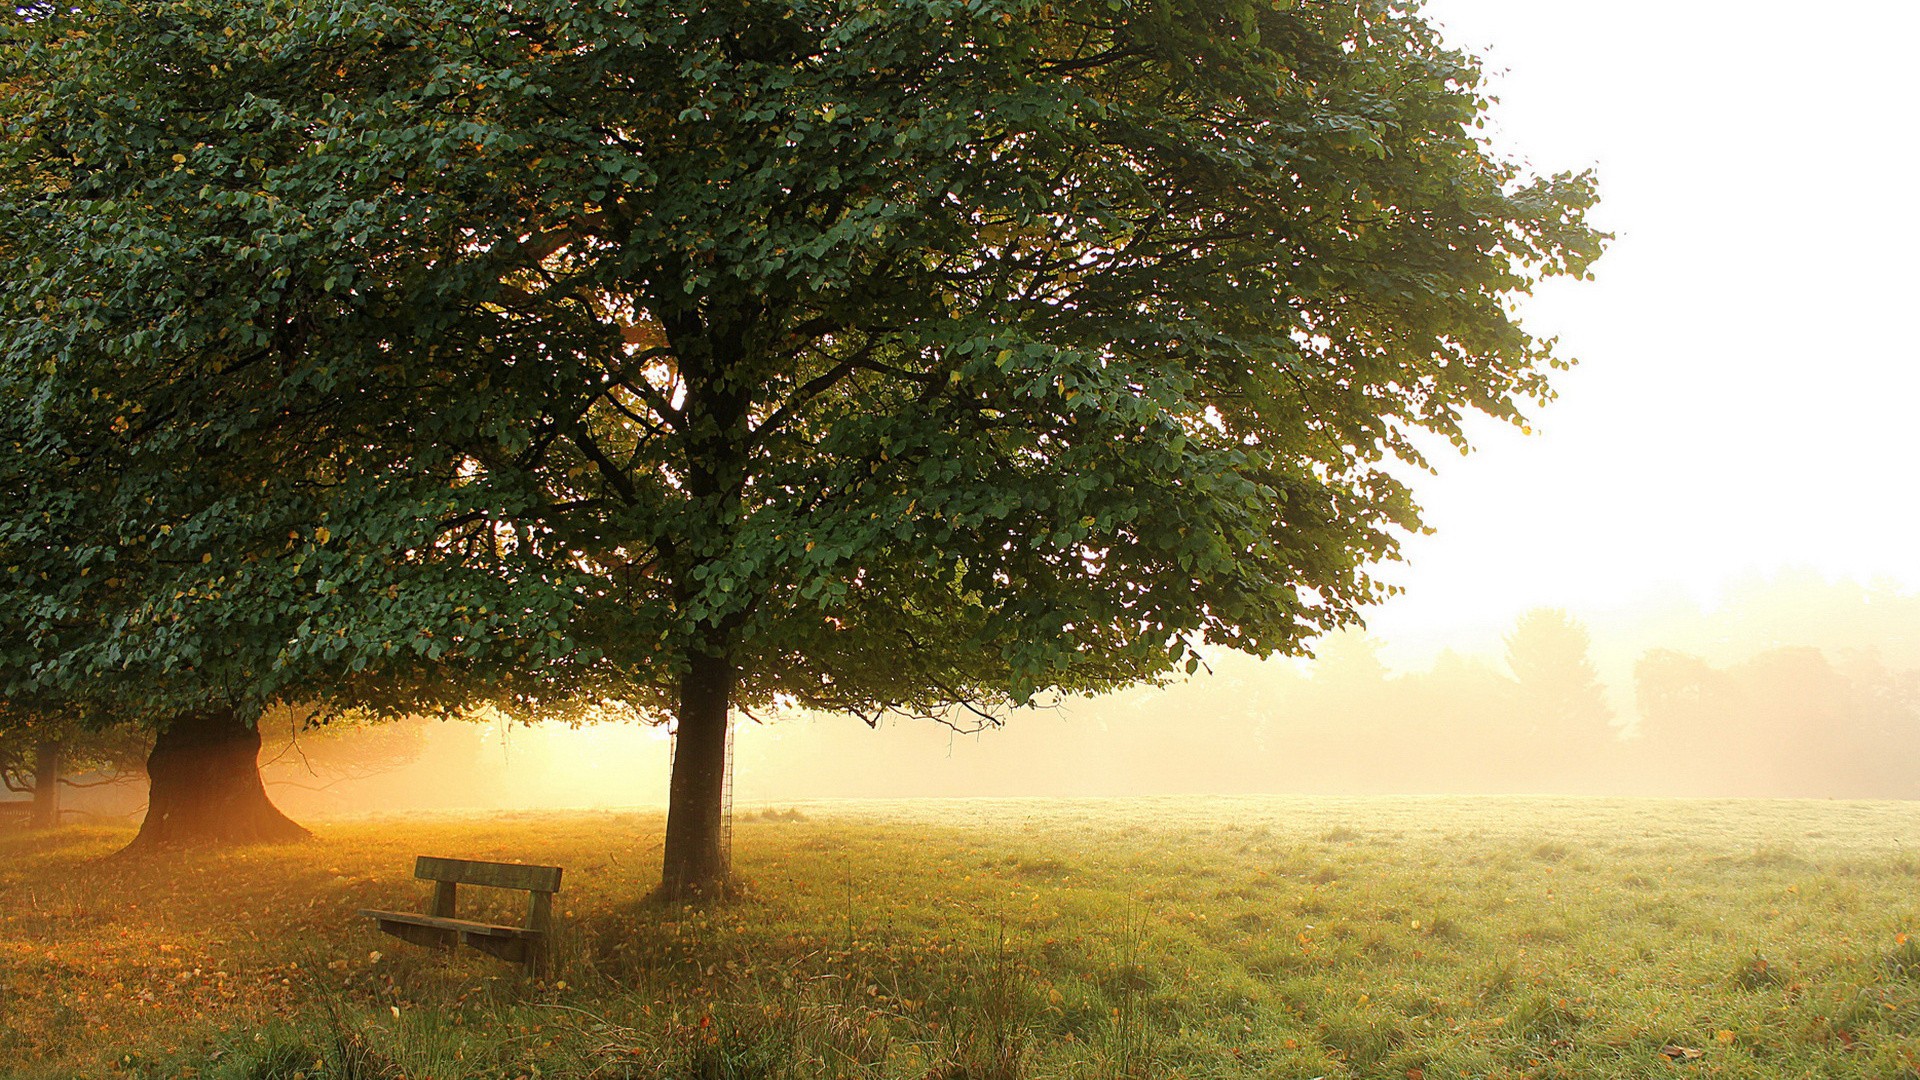 General 1920x1080 nature trees branch field mist morning sunset grass bench sunlight leaves